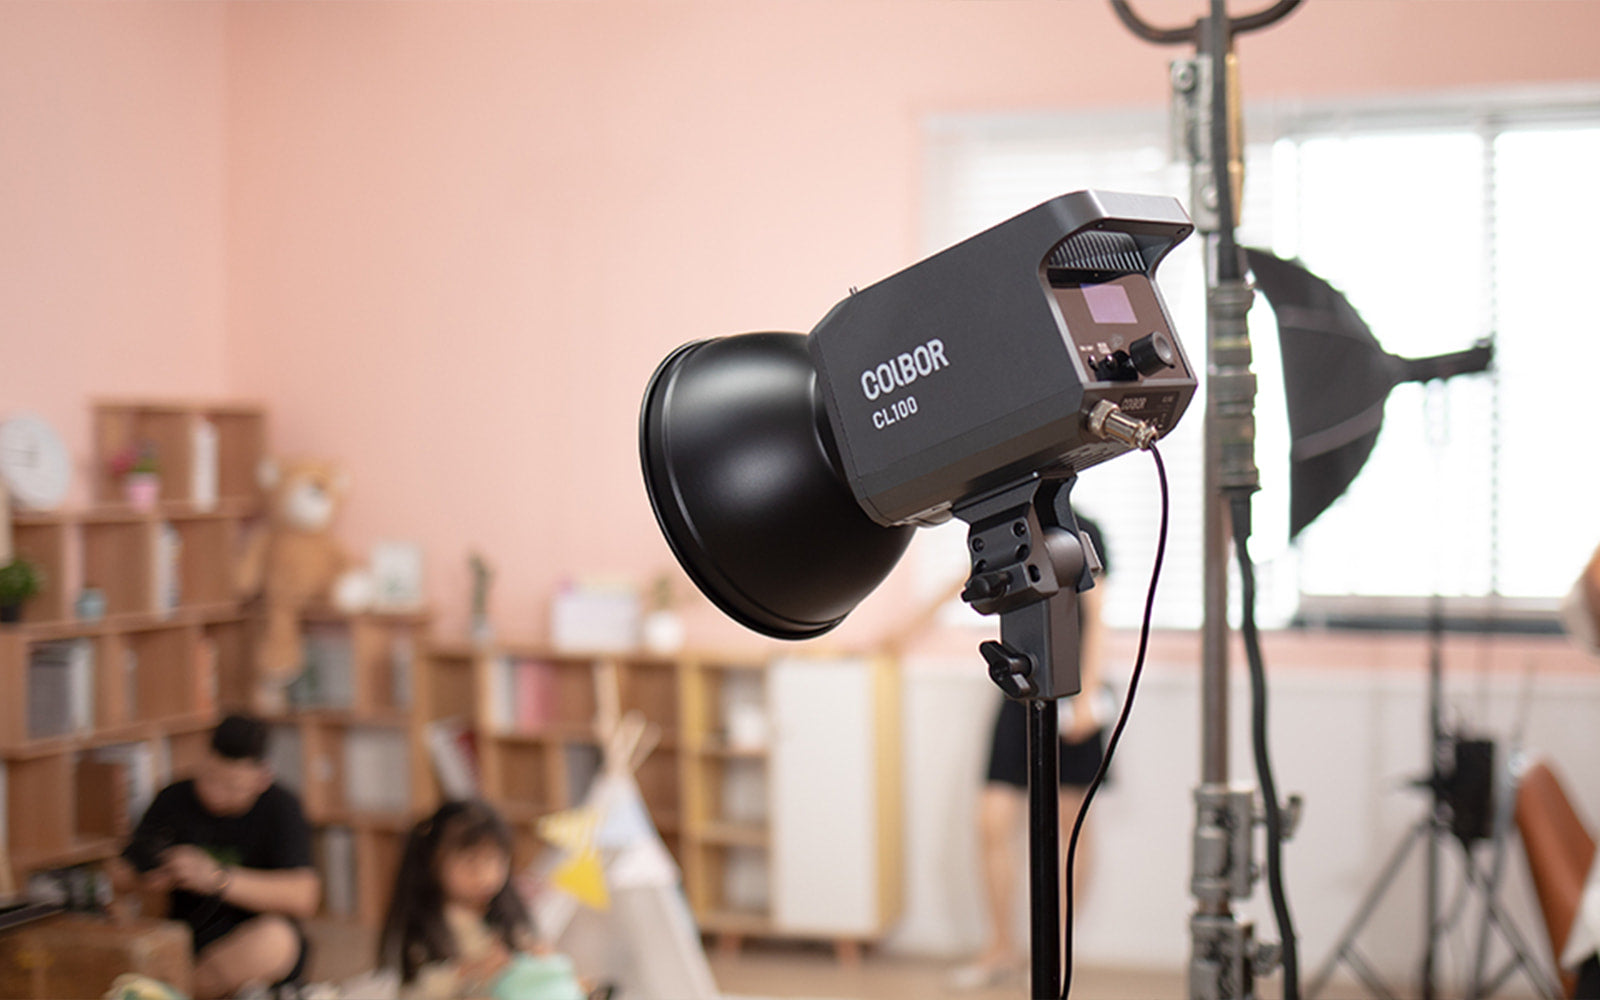 COLBOR CL100 is used for indoor shooting.